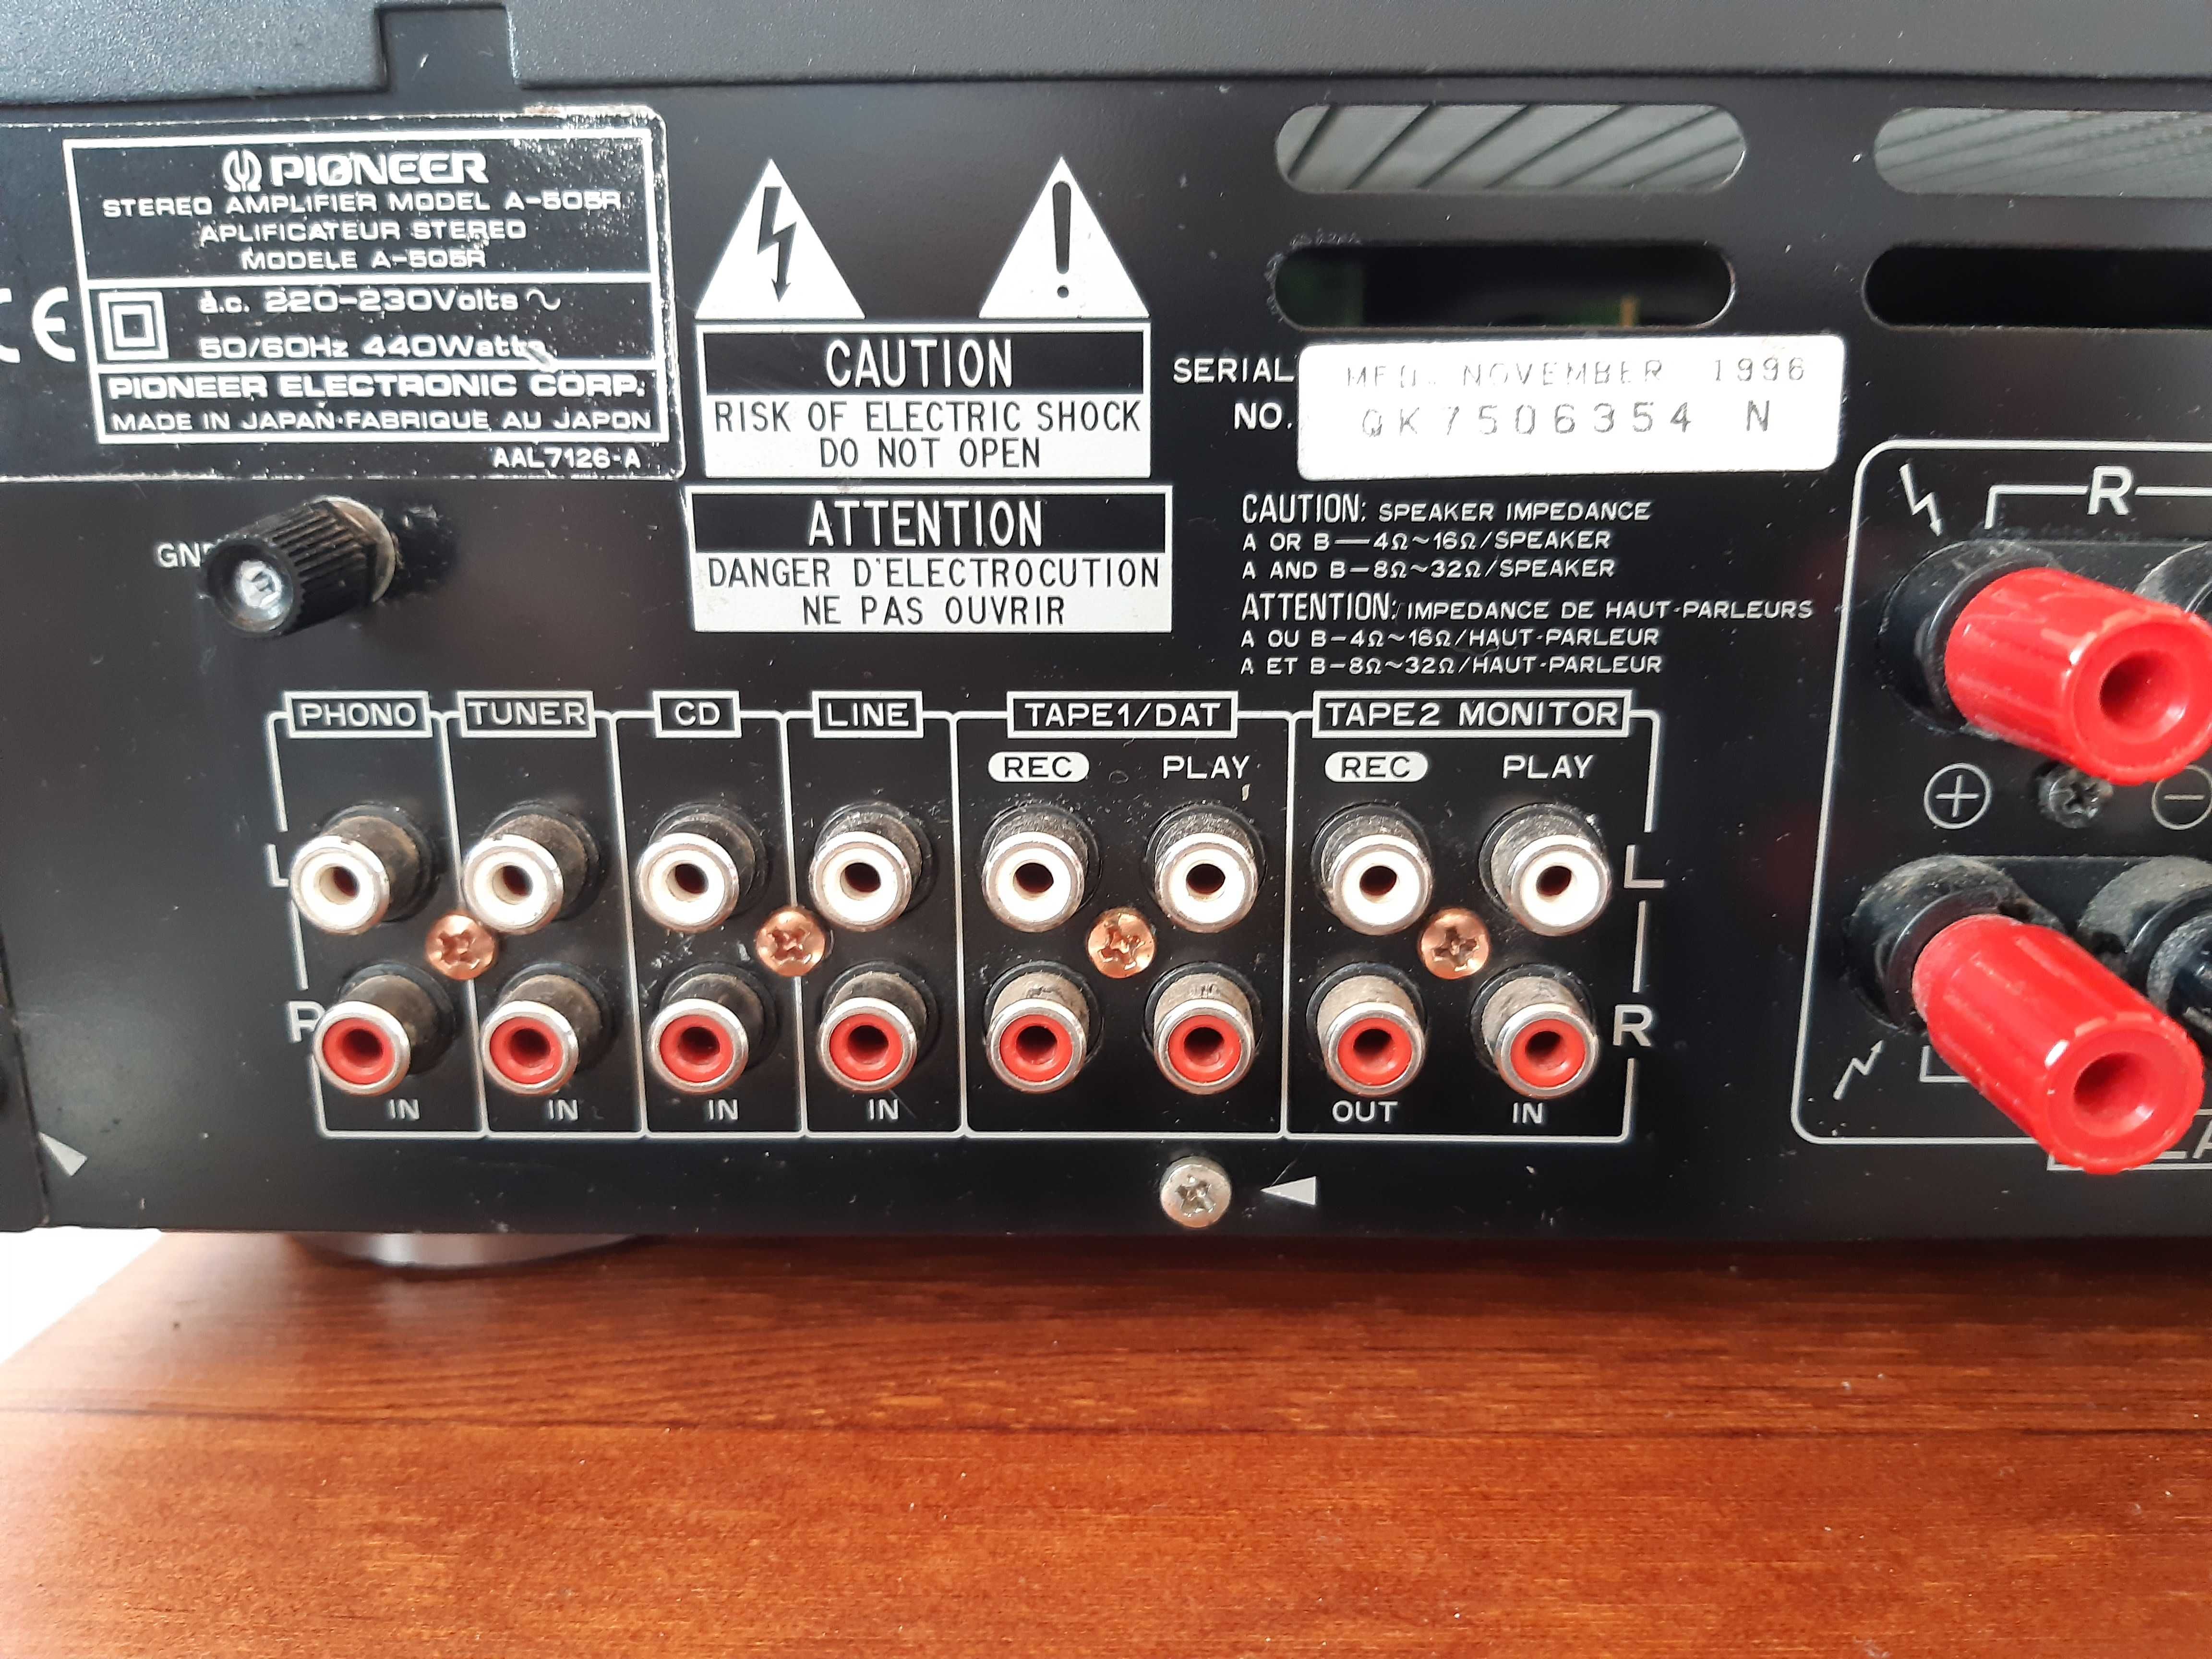 Amplificator stereo Pioneer A-505R Direct Energy MOS